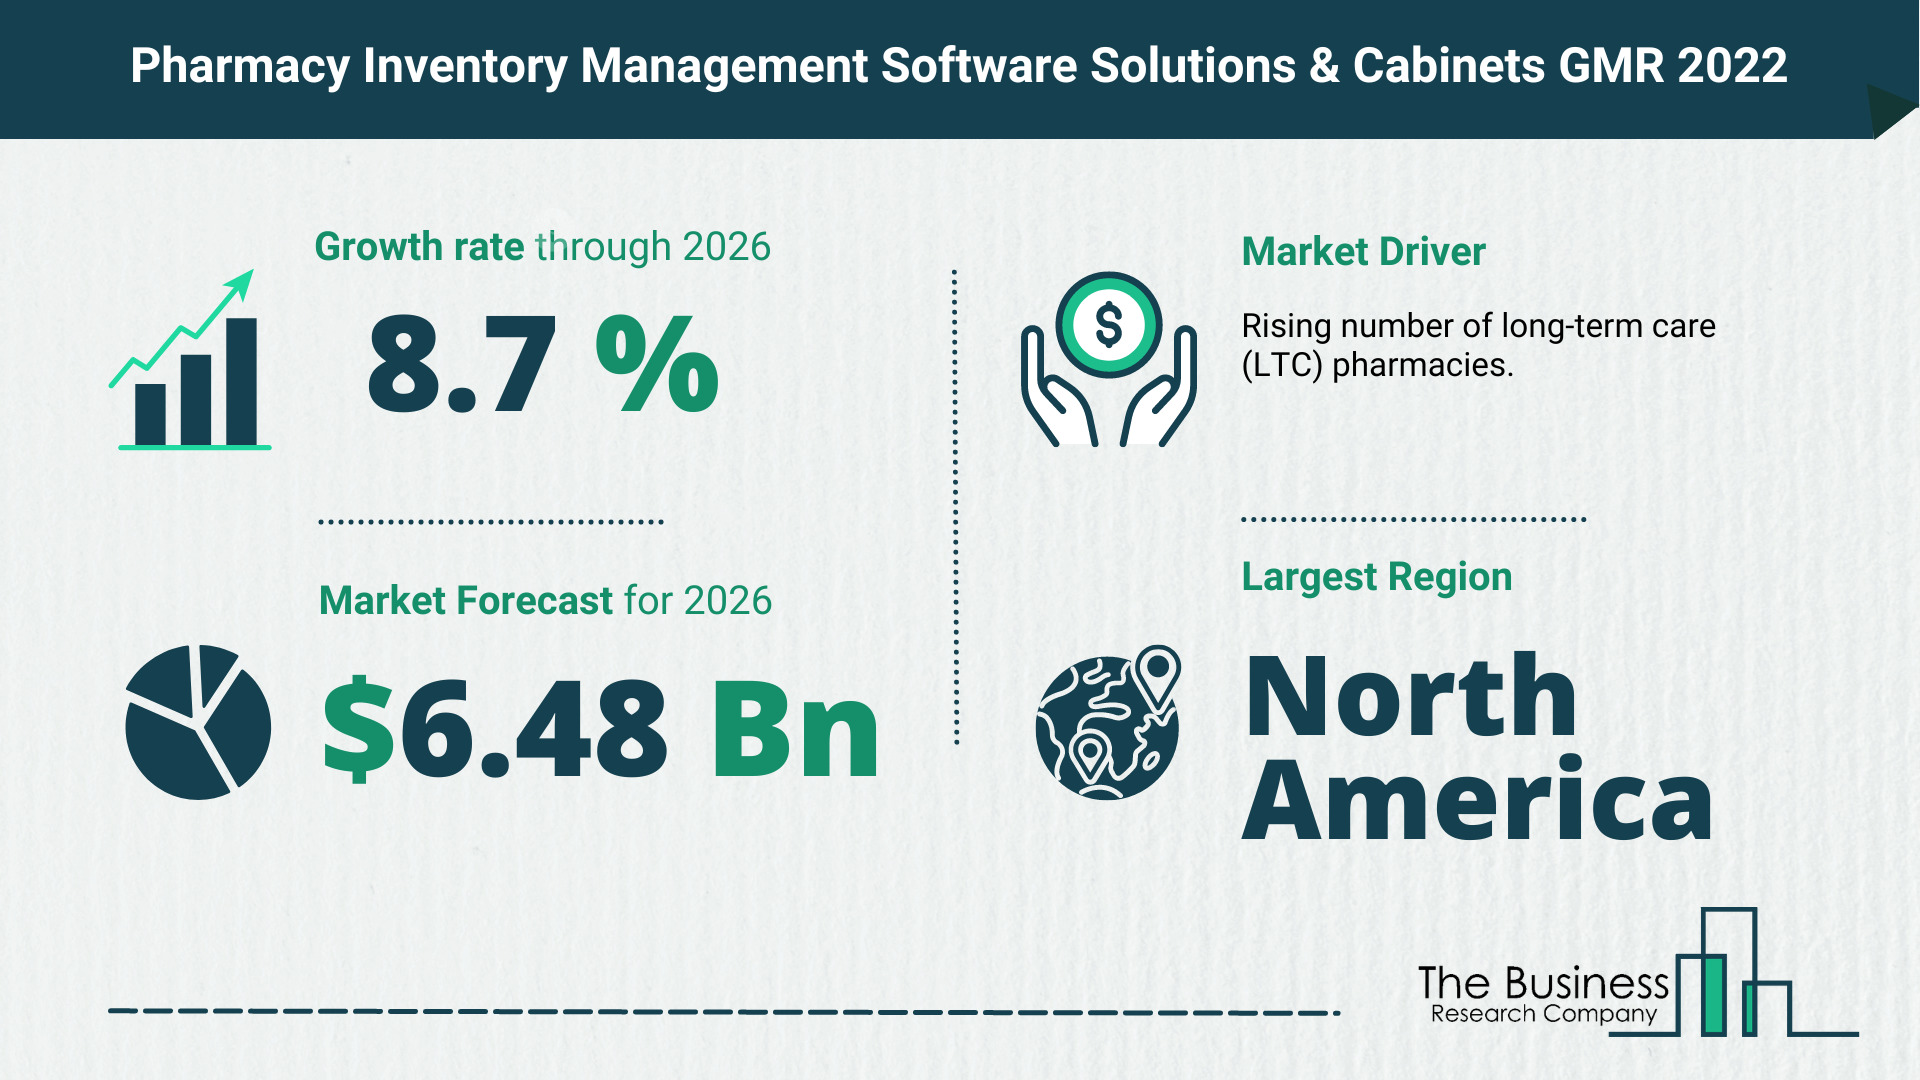 Latest Pharmacy Inventory Management Software Solutions and Cabinets Market Growth Study 2022-2026 By The Business Research Company